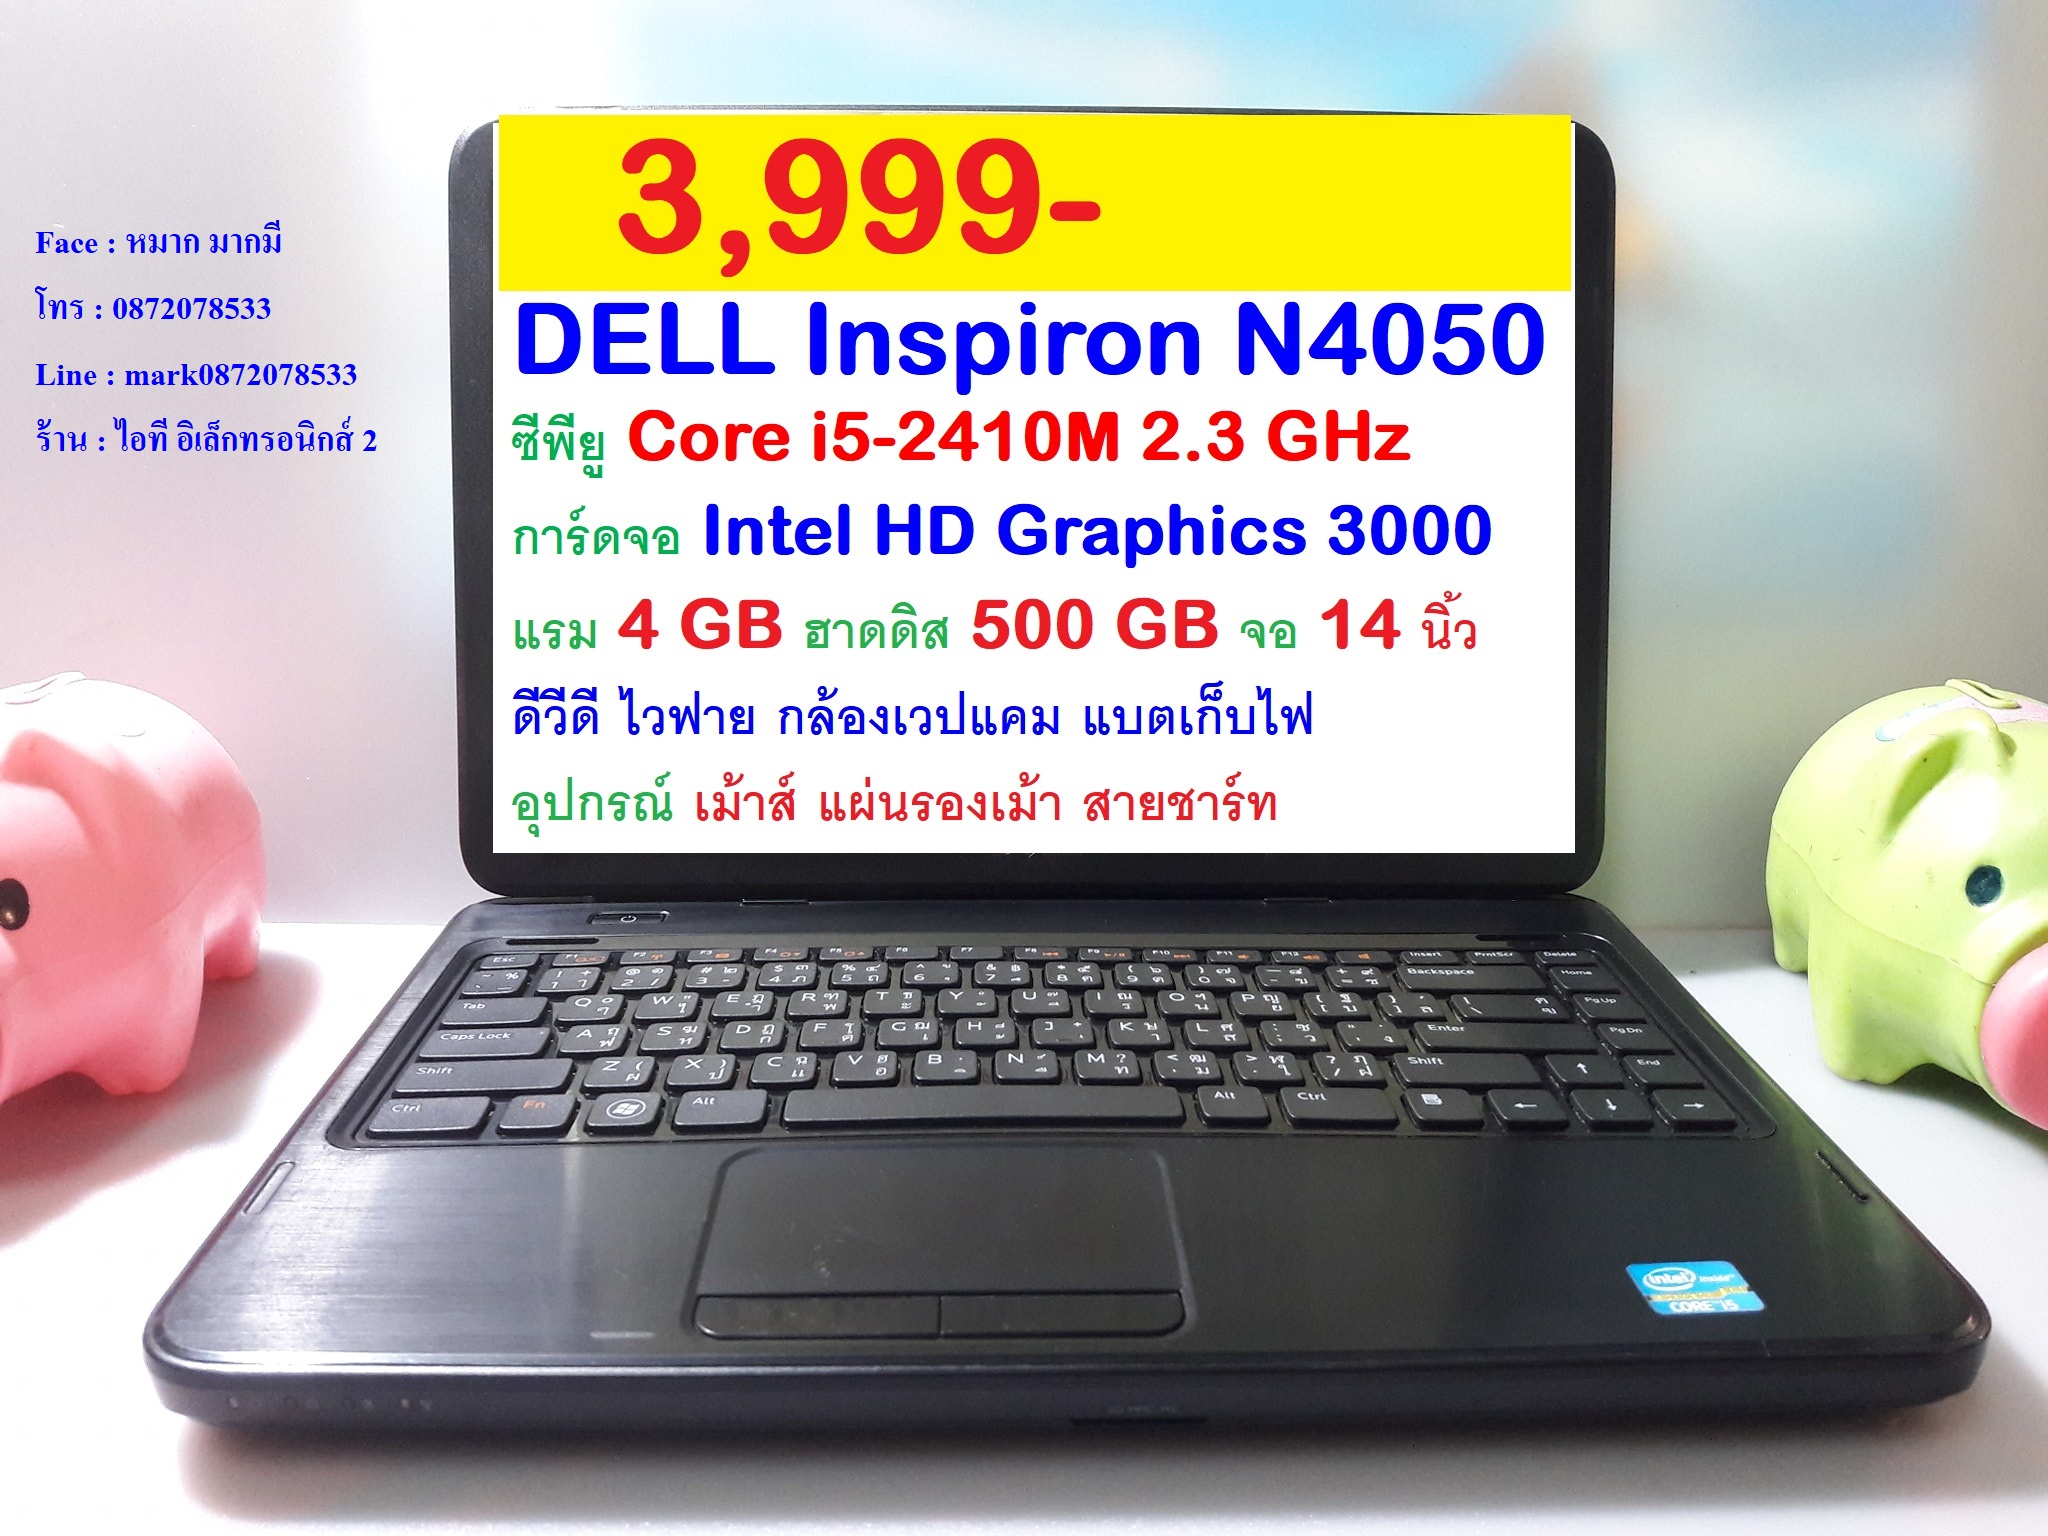 DELL Inspiron N4050 รูปที่ 1